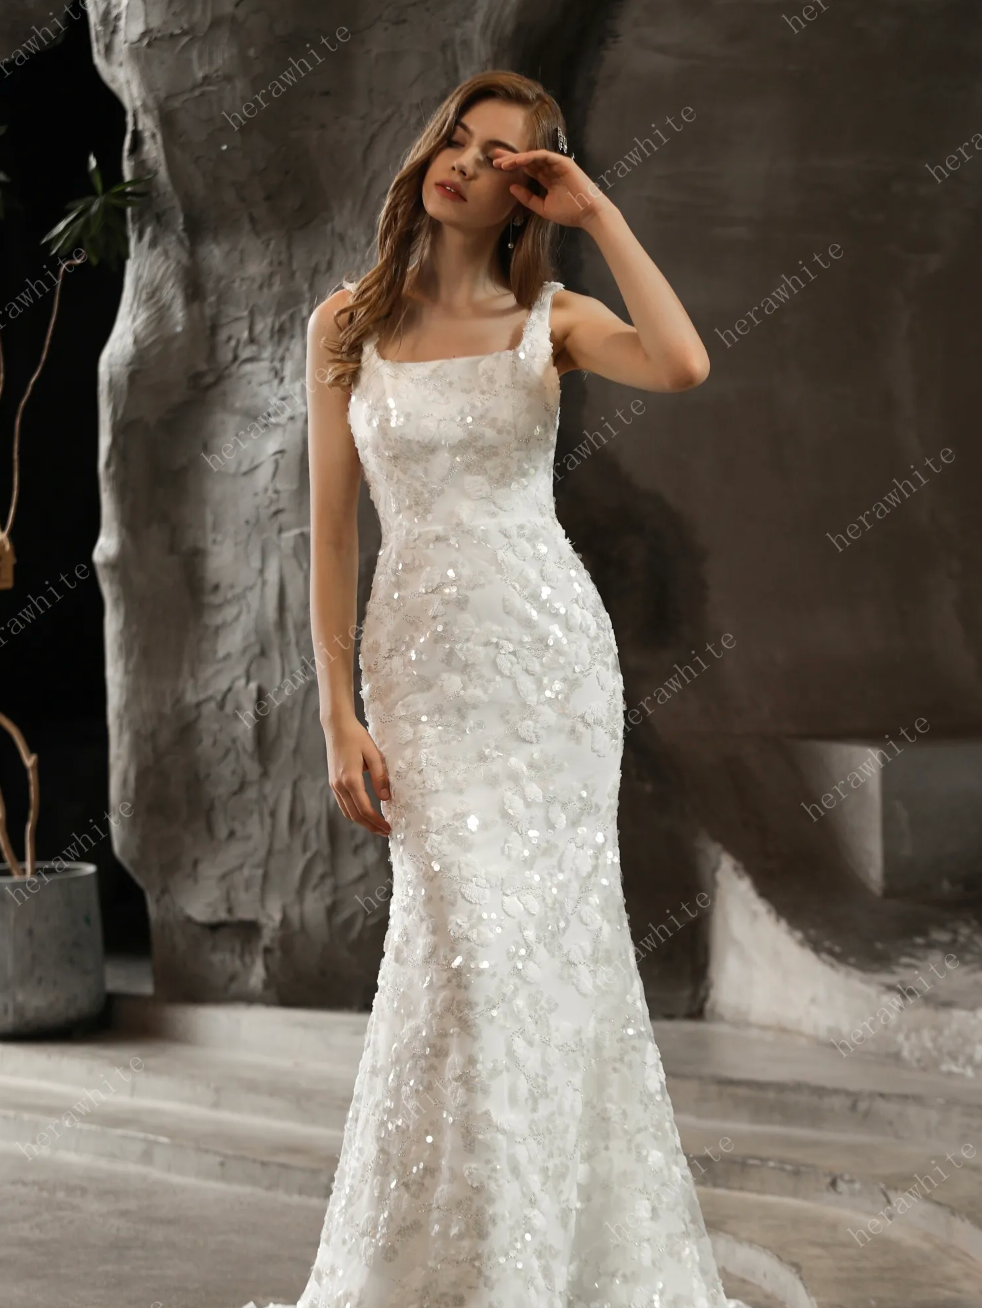 Off-the-Shoulder Sheath Wedding Dress with Luxury Illusion Lace – TulleLux  Bridal Crowns & Accessories